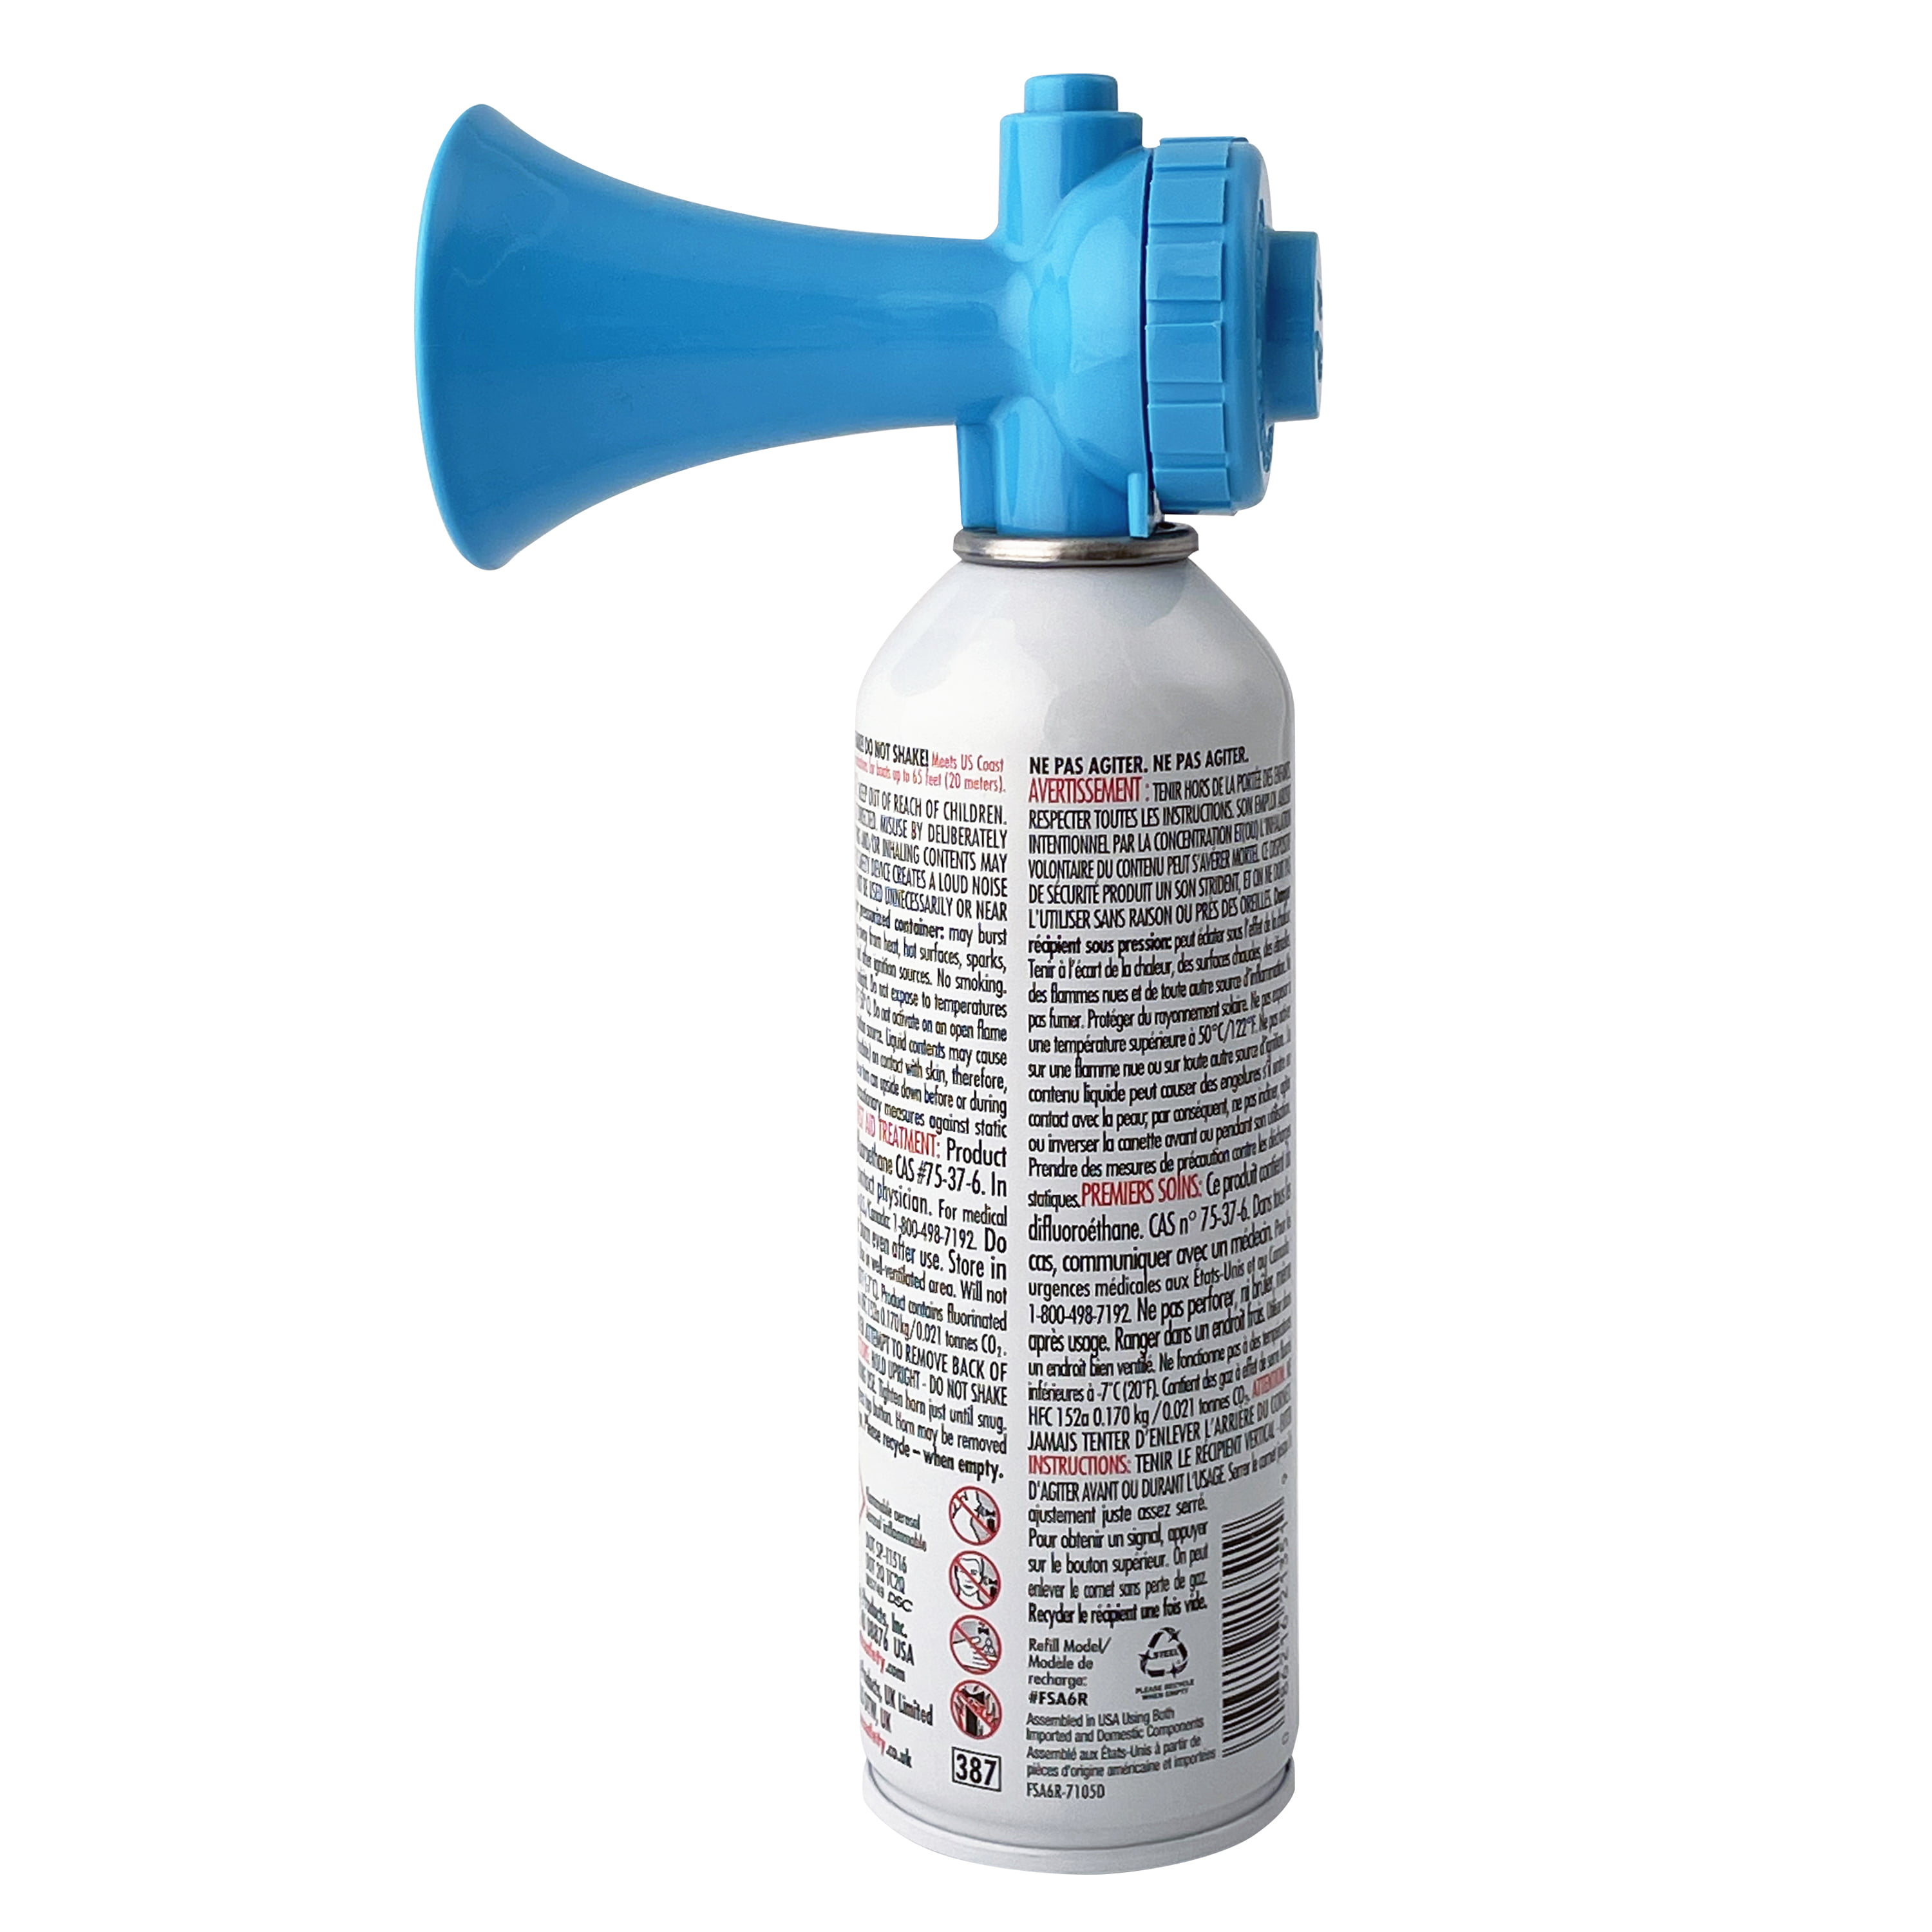 1X High Tone Aerosol Air Horn Sport Party Graduate Safety Very Loud Noise Maker